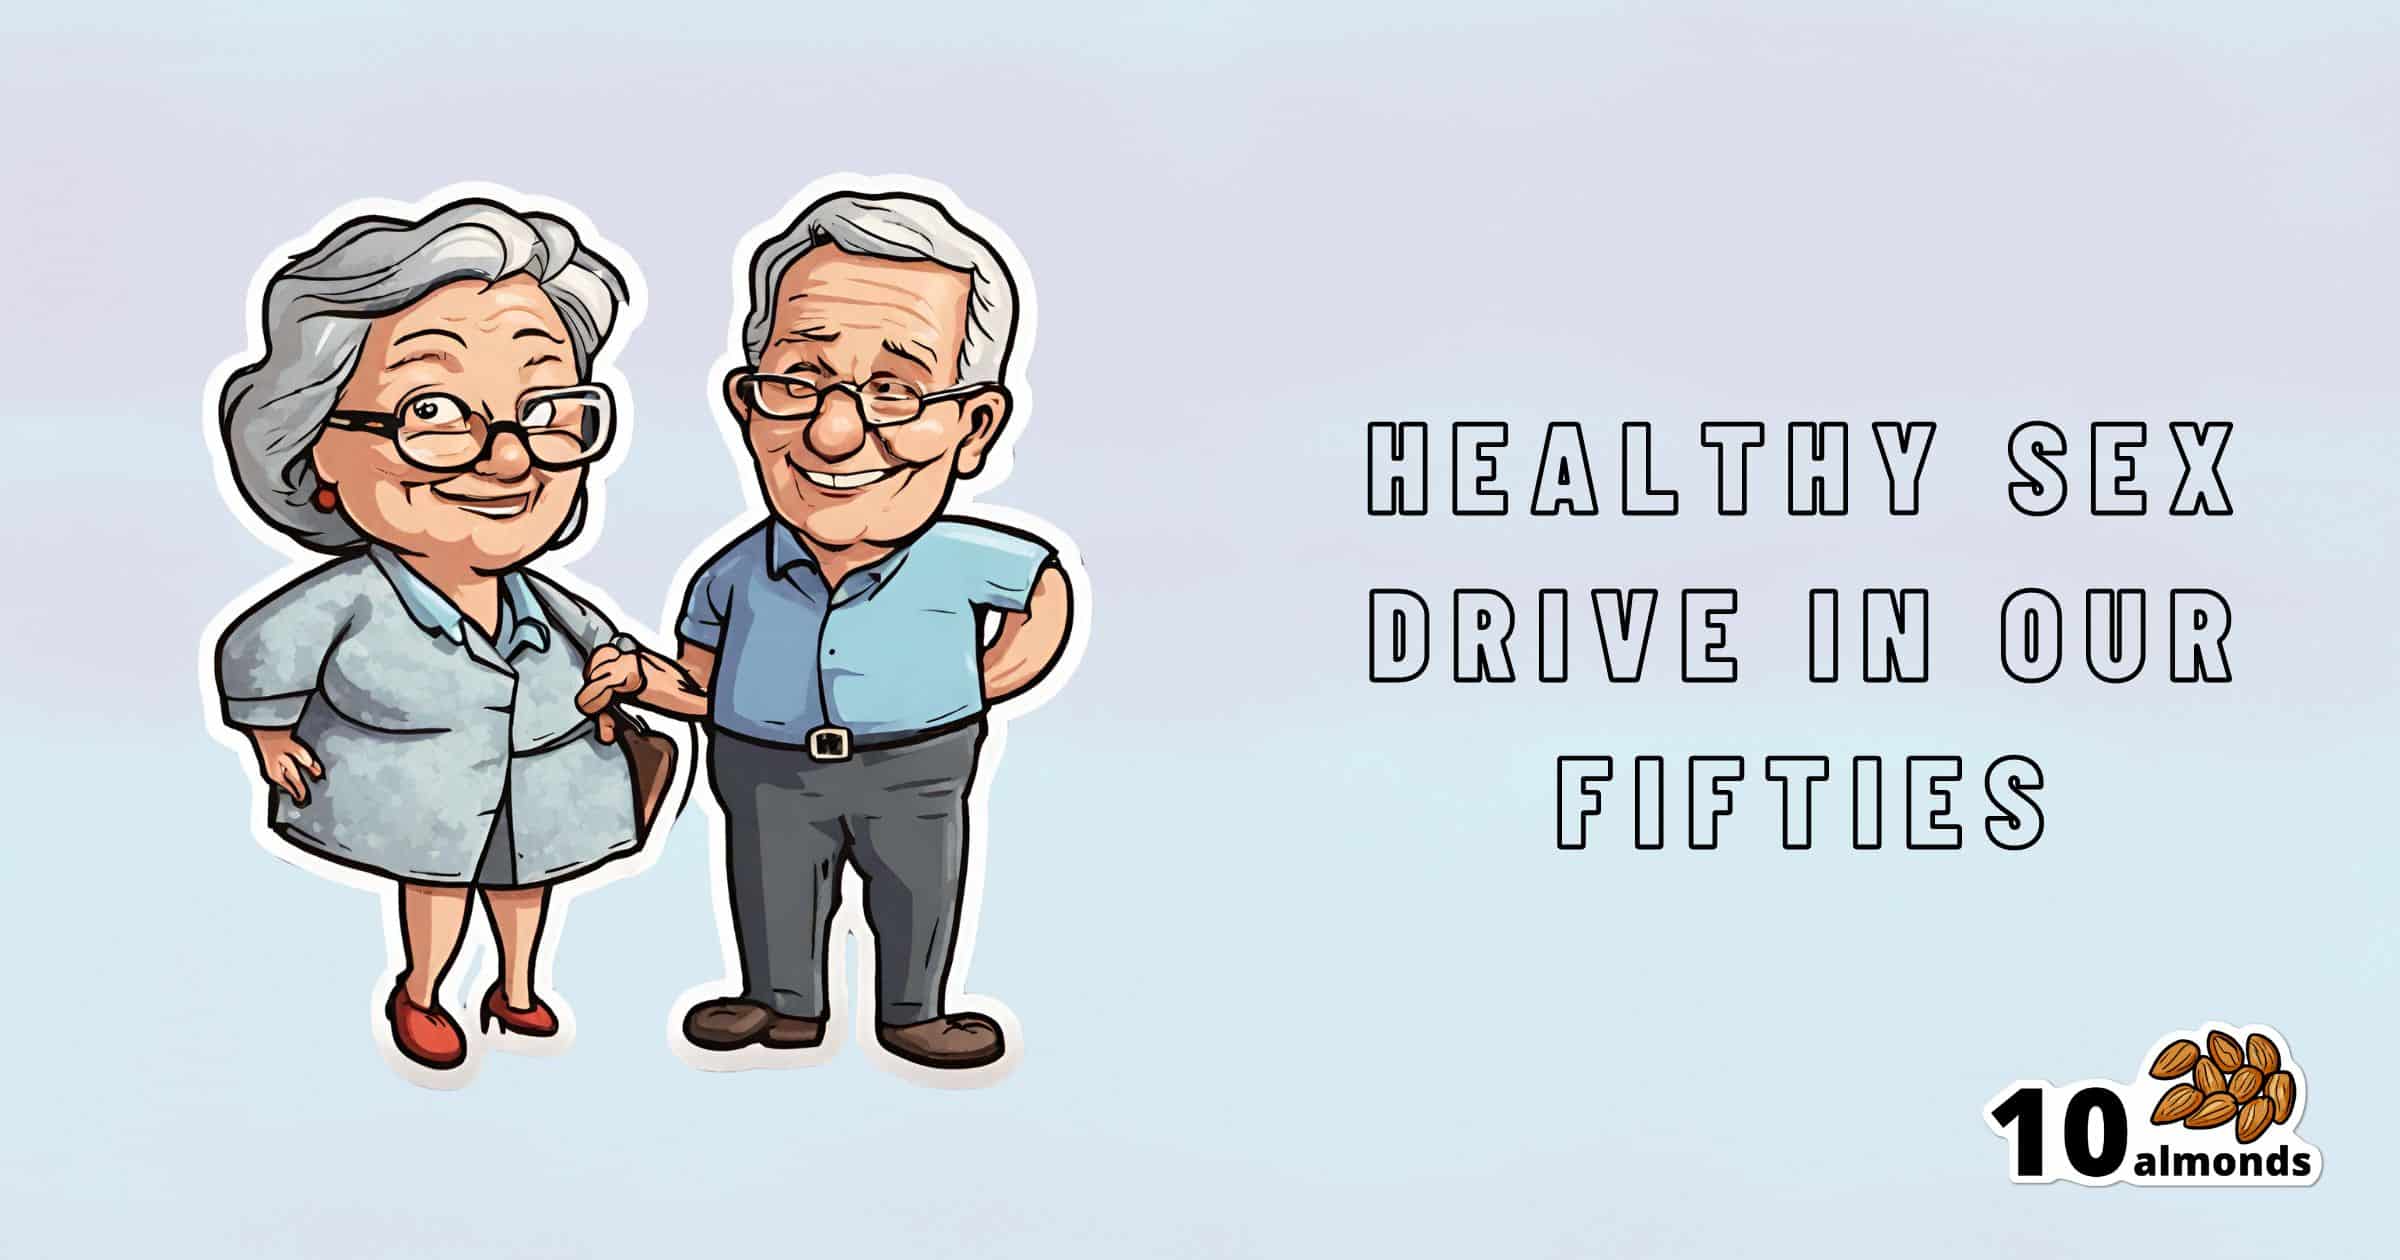 Illustration of a couple in their fifties, smiling and holding hands. Text reads "Healthy Sex Drive in our Fifties" to the right of the couple. A logo with the number 10 and a cluster of almonds is placed in the bottom right corner.